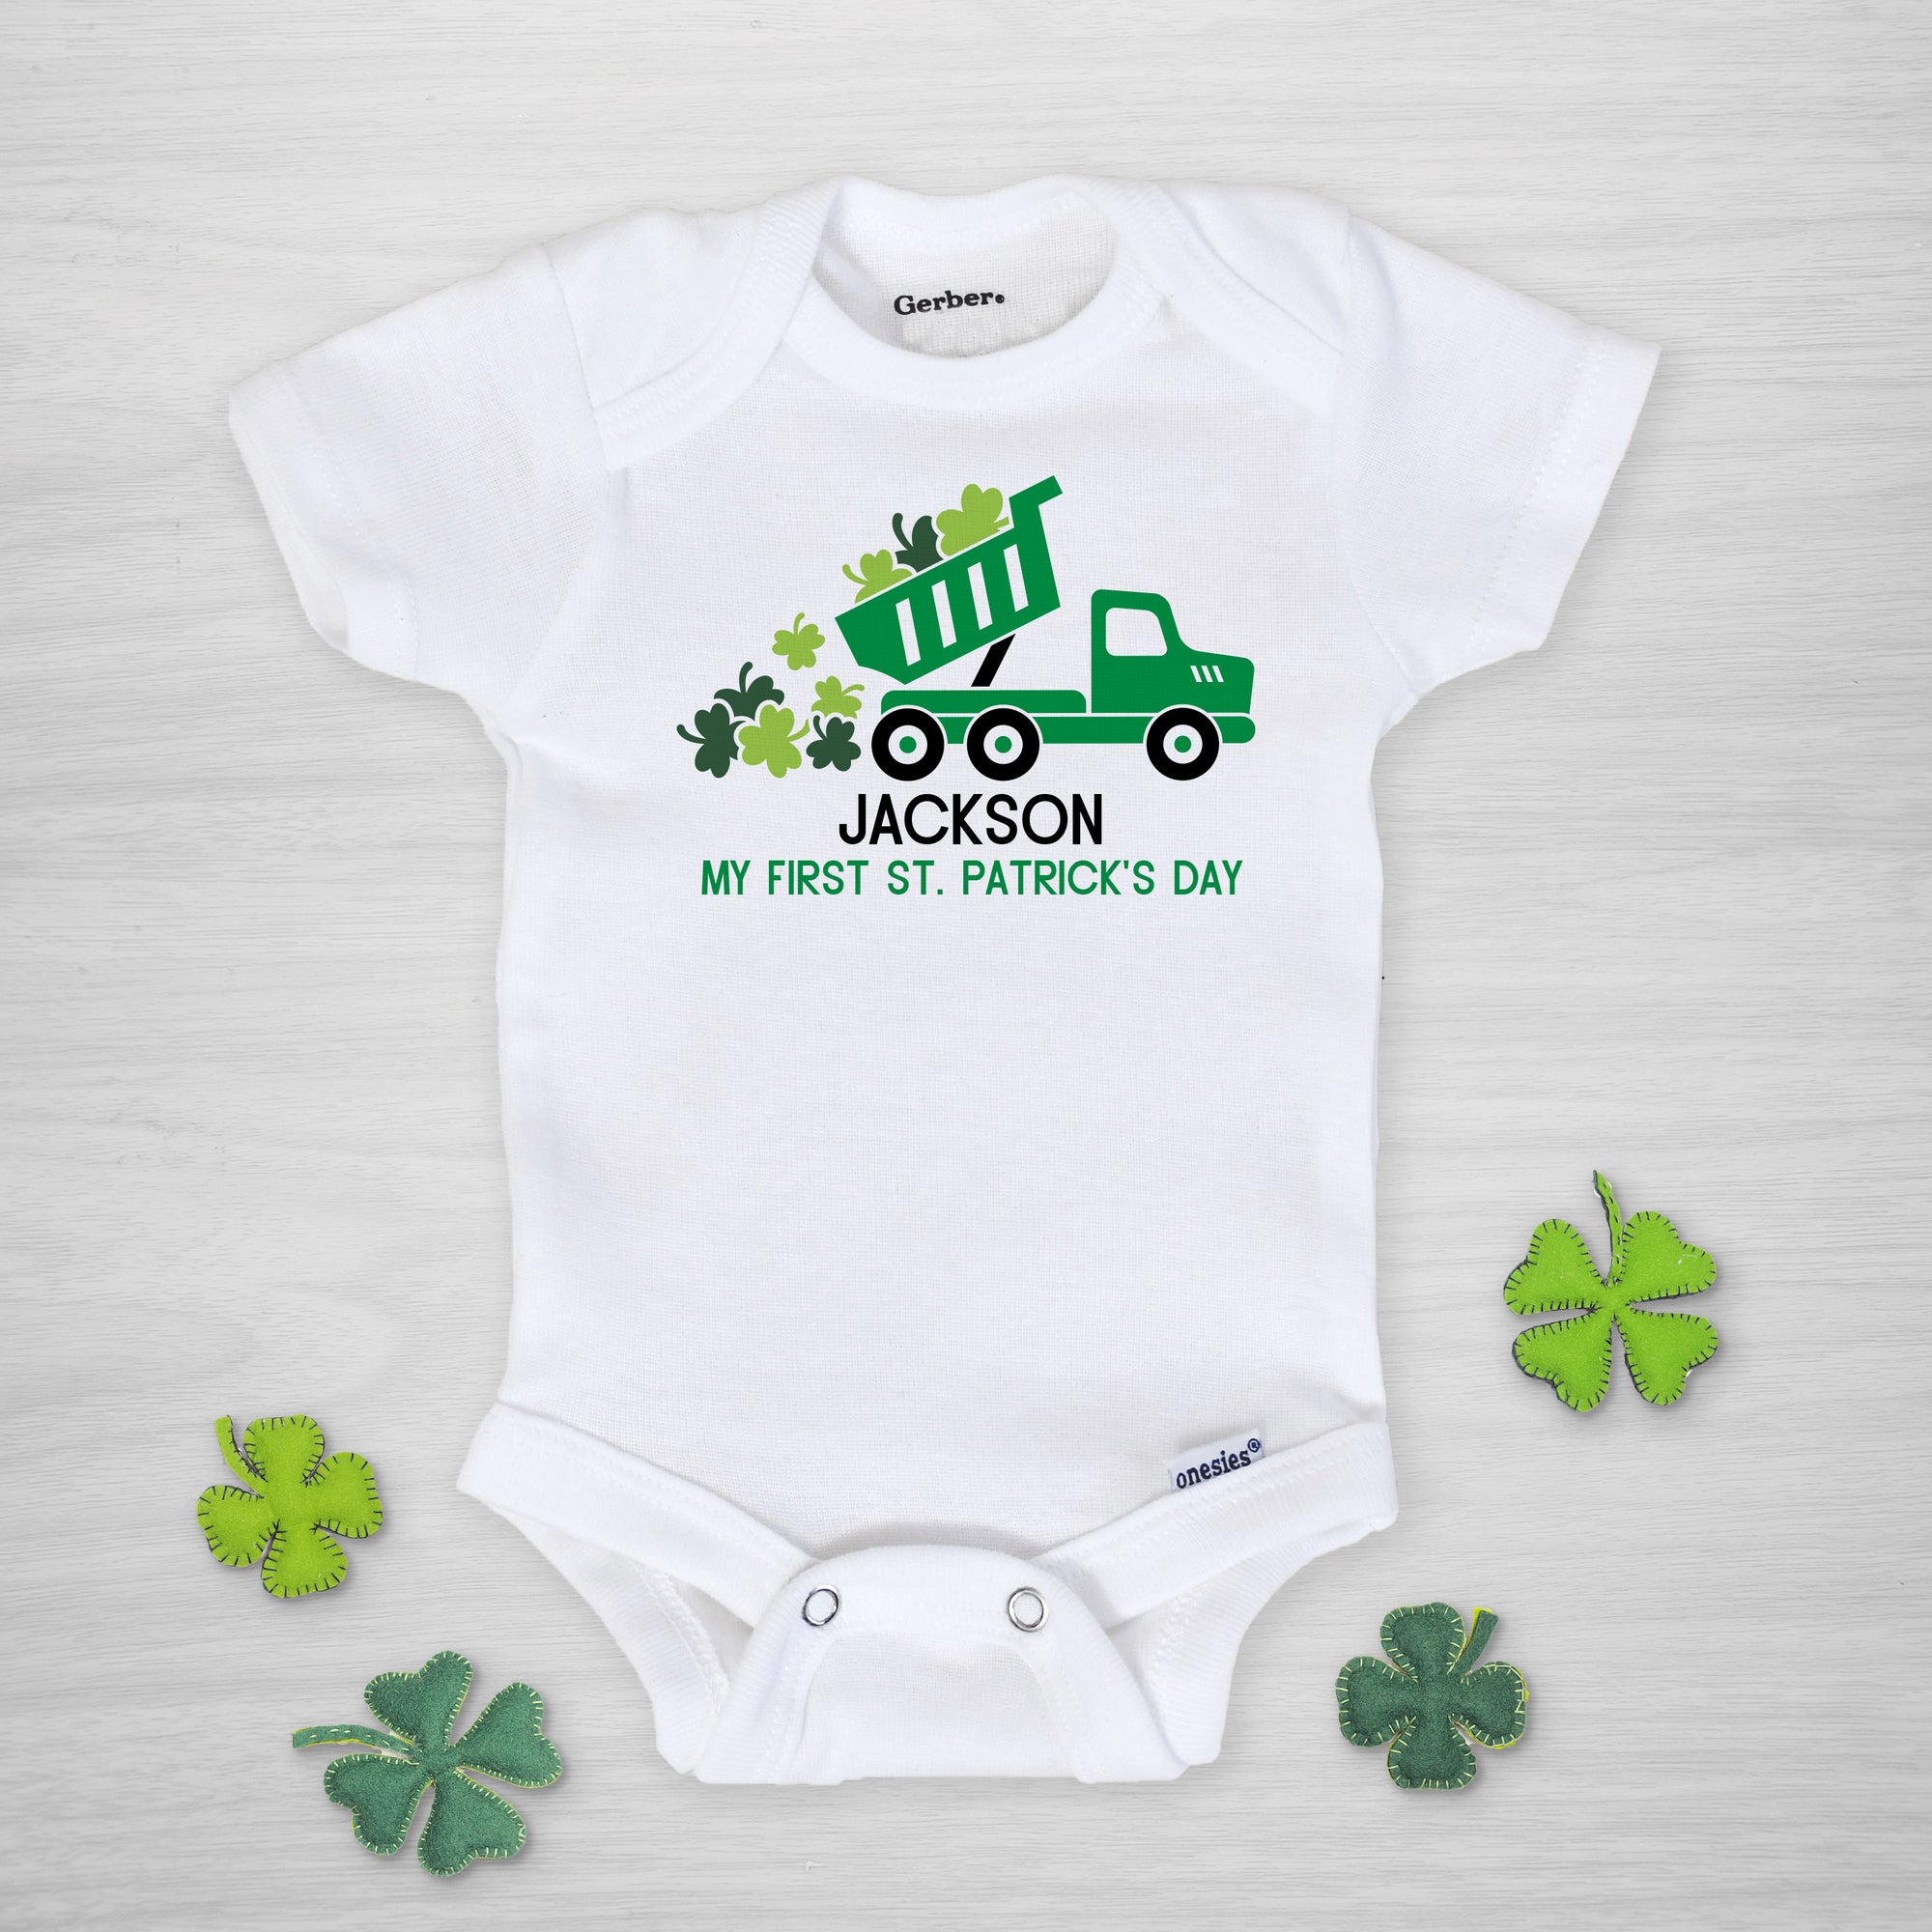 Dump Truck with Shamrocks St. Patrick's Day Personalized Gerber Onesie, long sleeved